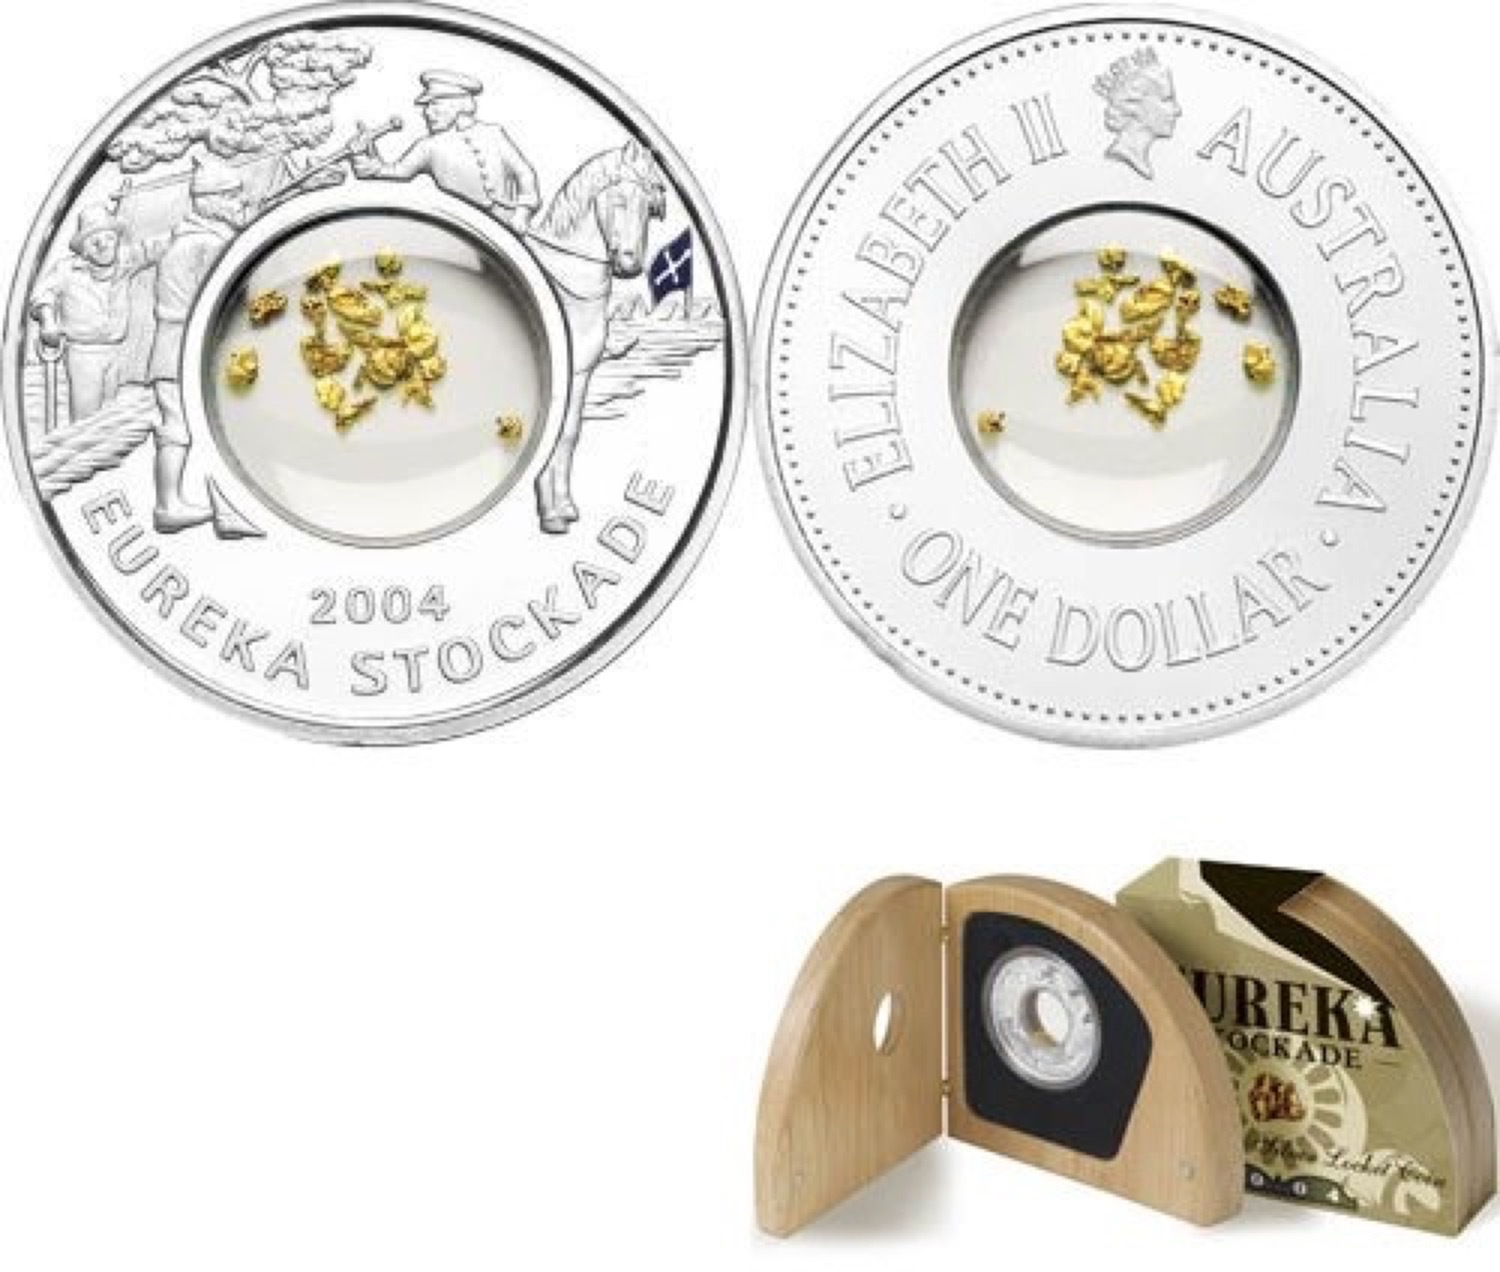 2004 Silver One Ounce Proof Coin Eureka Stockade Gold Locket product image